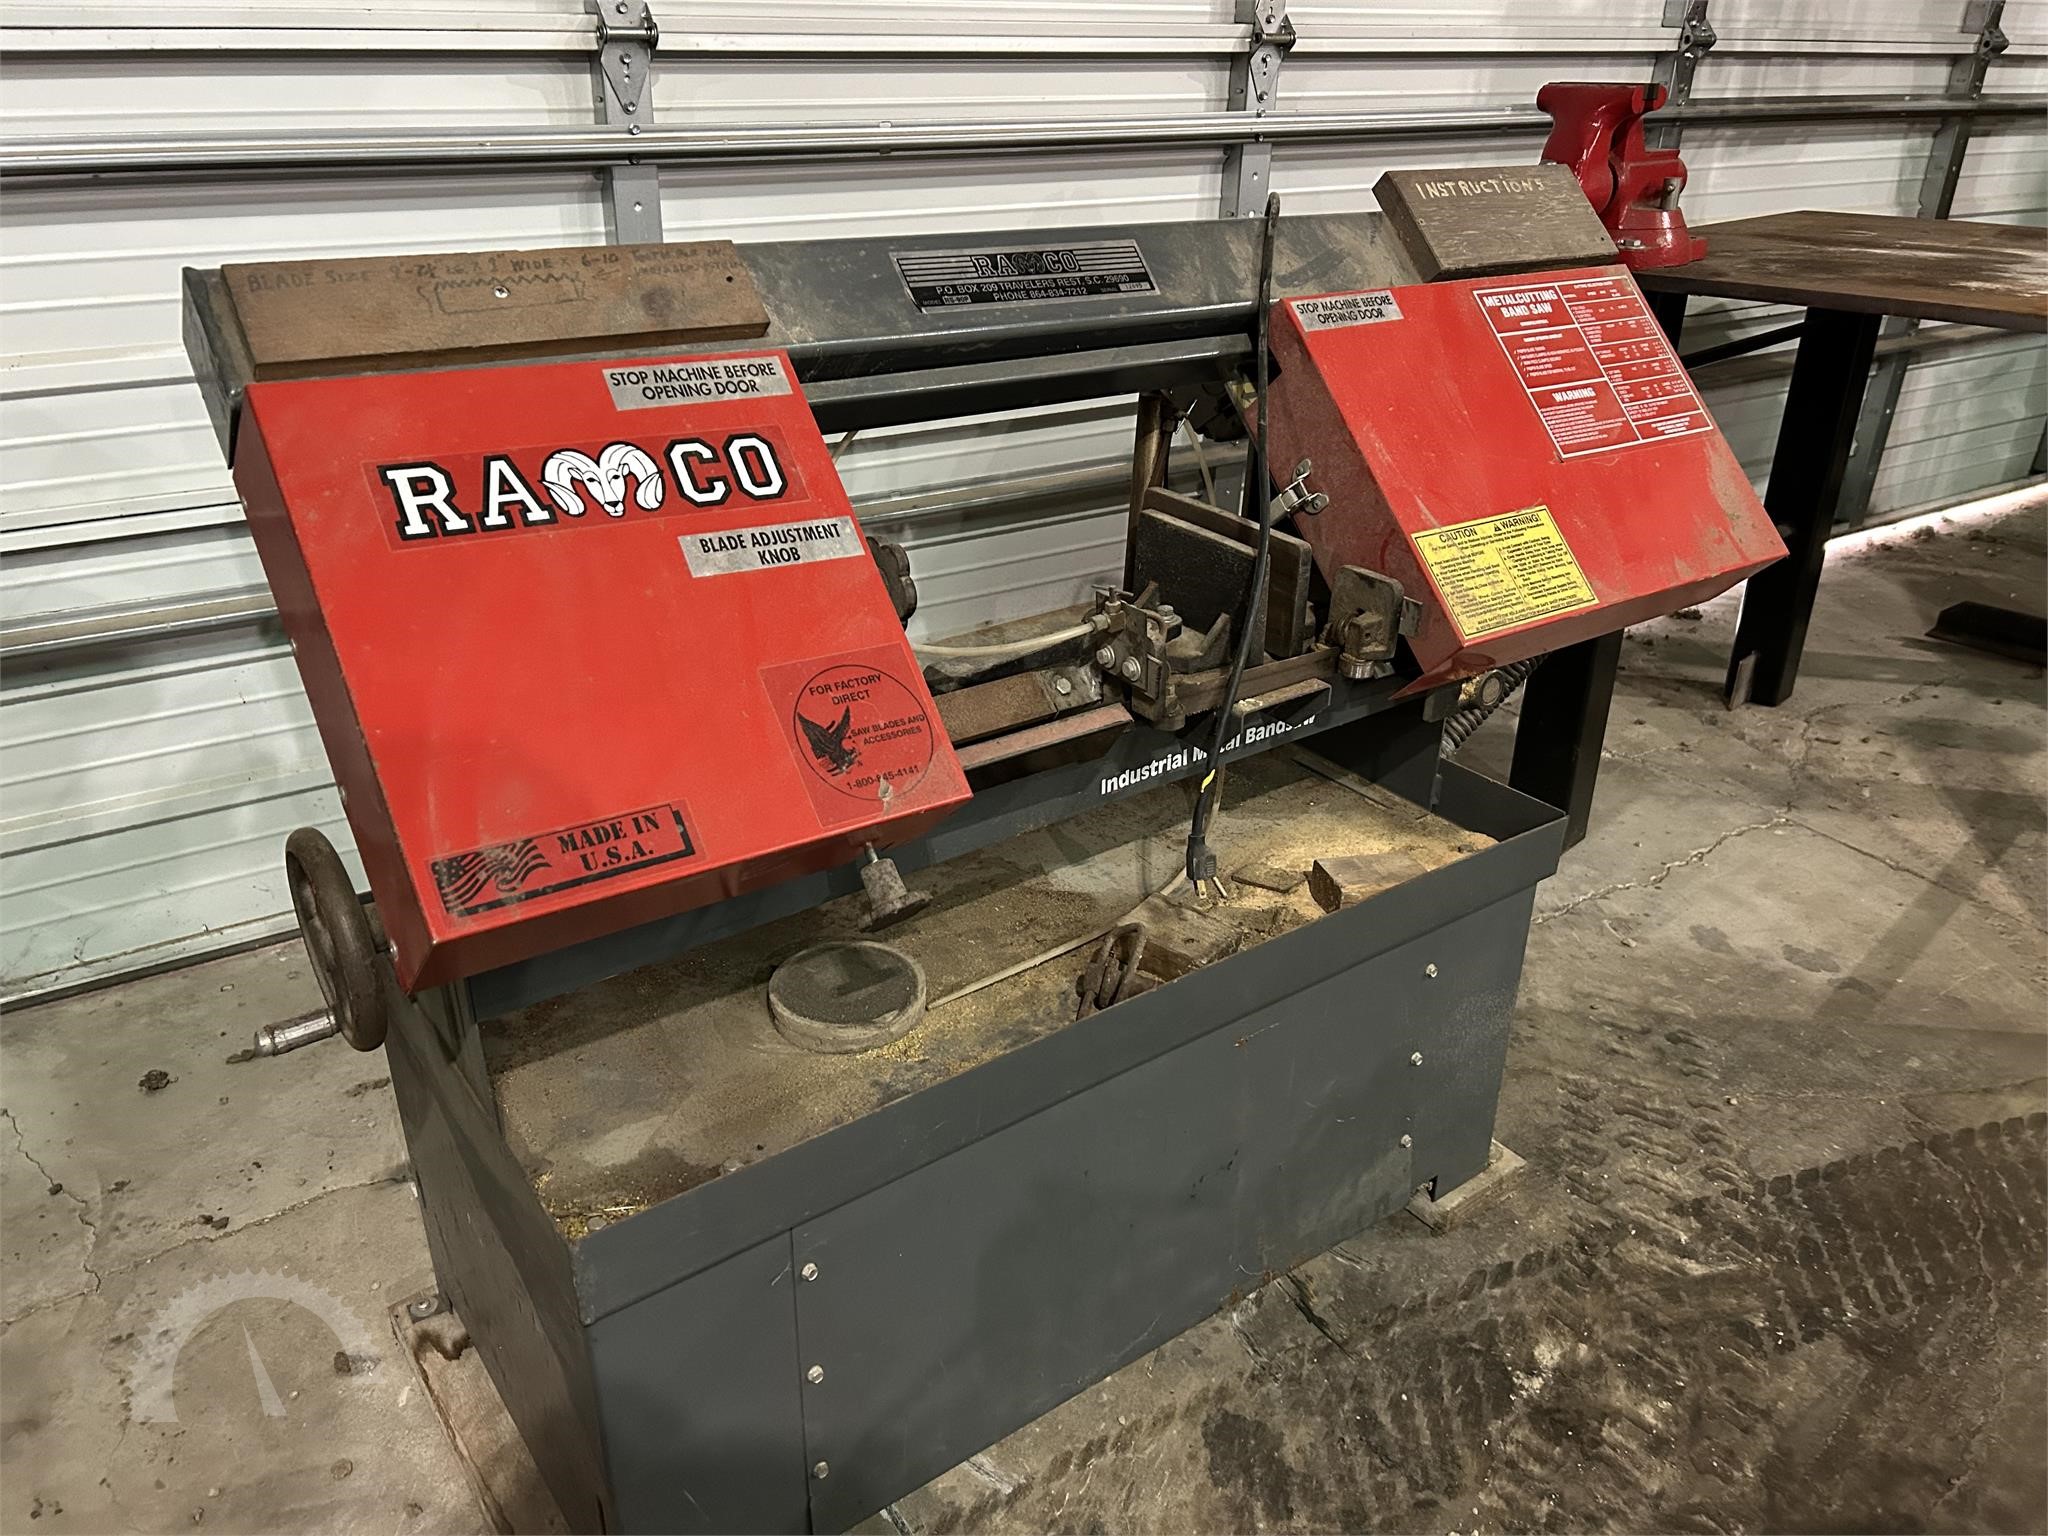 Shop / Warehouse Auction Results